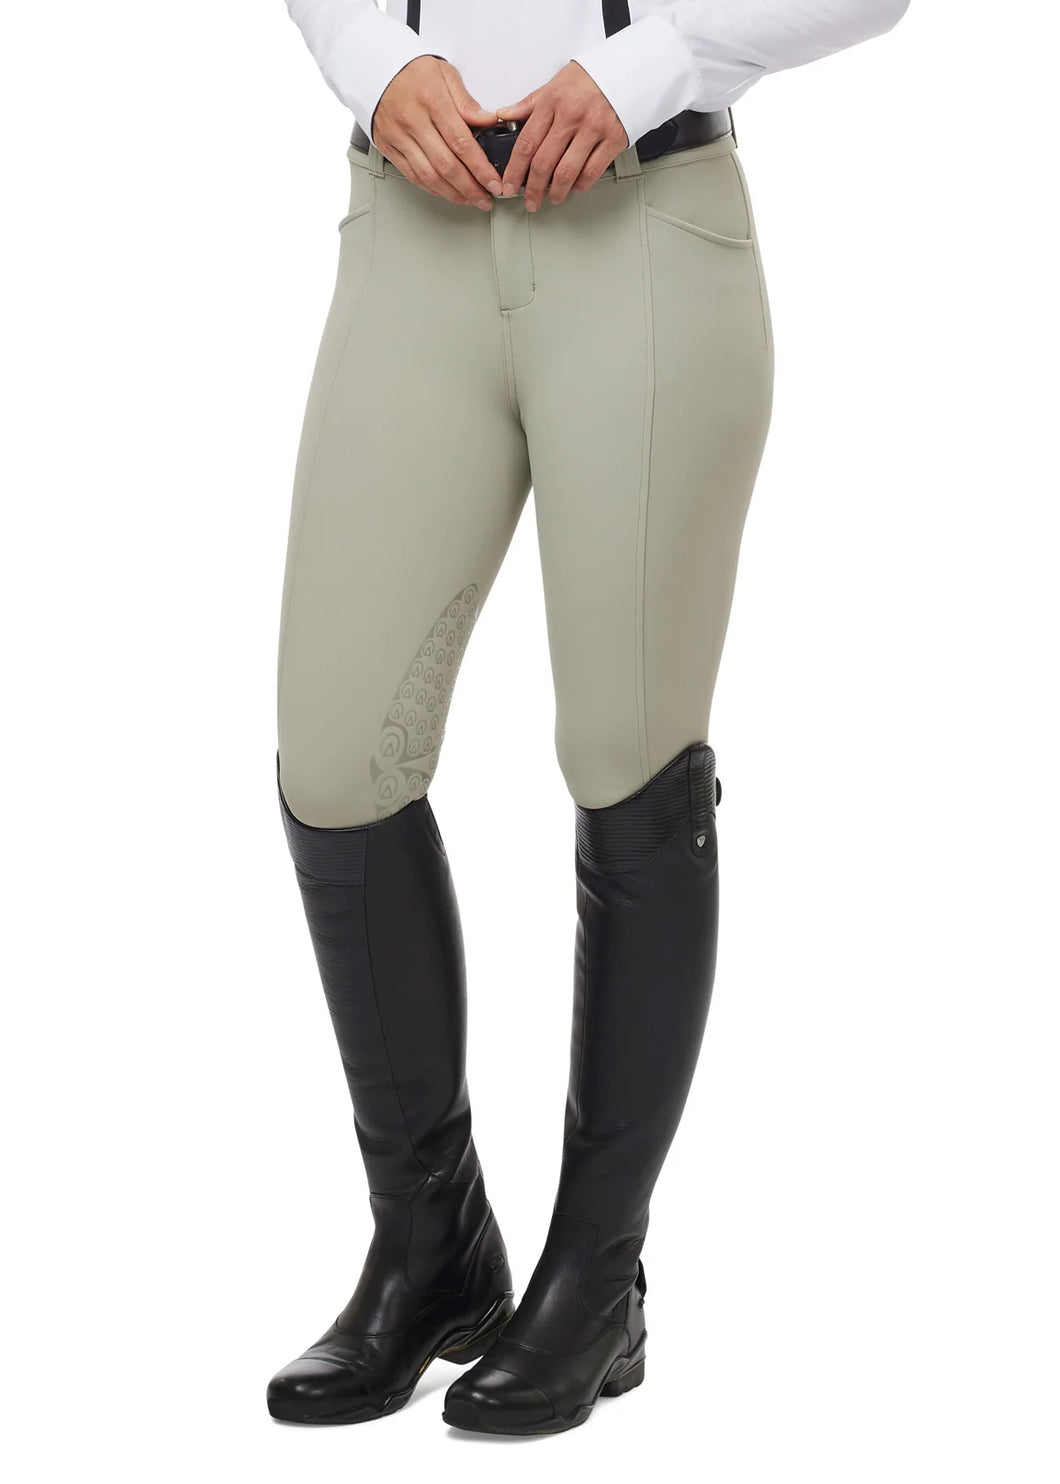 Kerrits Affinity Pro Silicone Knee Patch Riding Breech